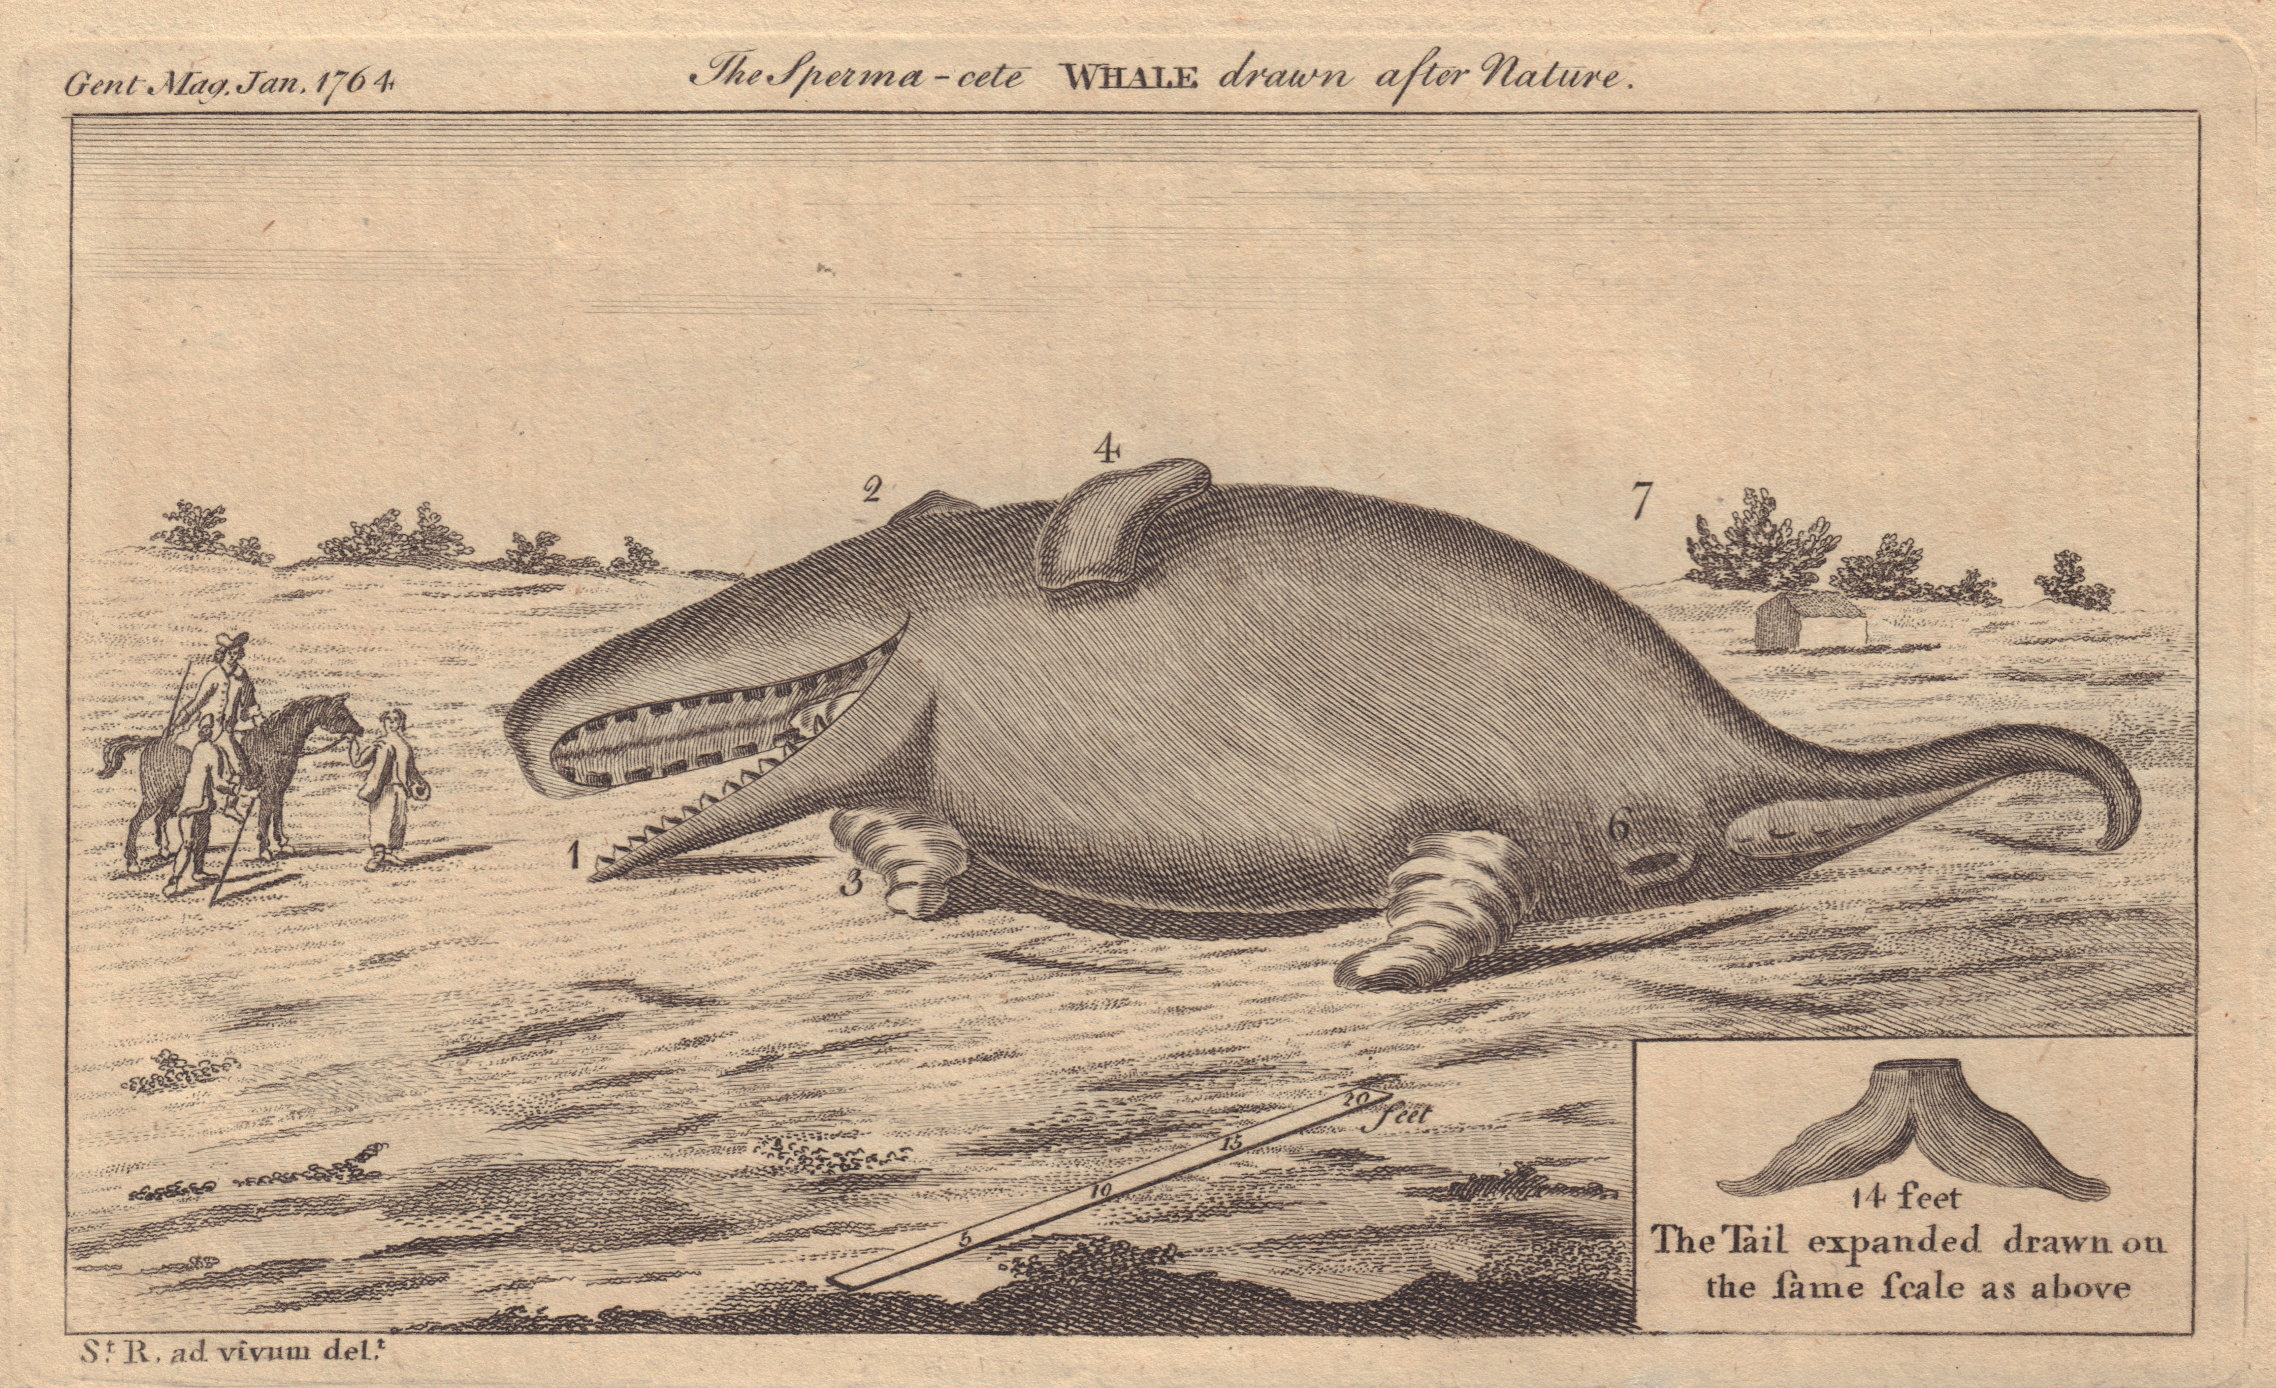 A Spermaceti Whale thrown ashore near Whitstable in Kent. Beached whale 1764